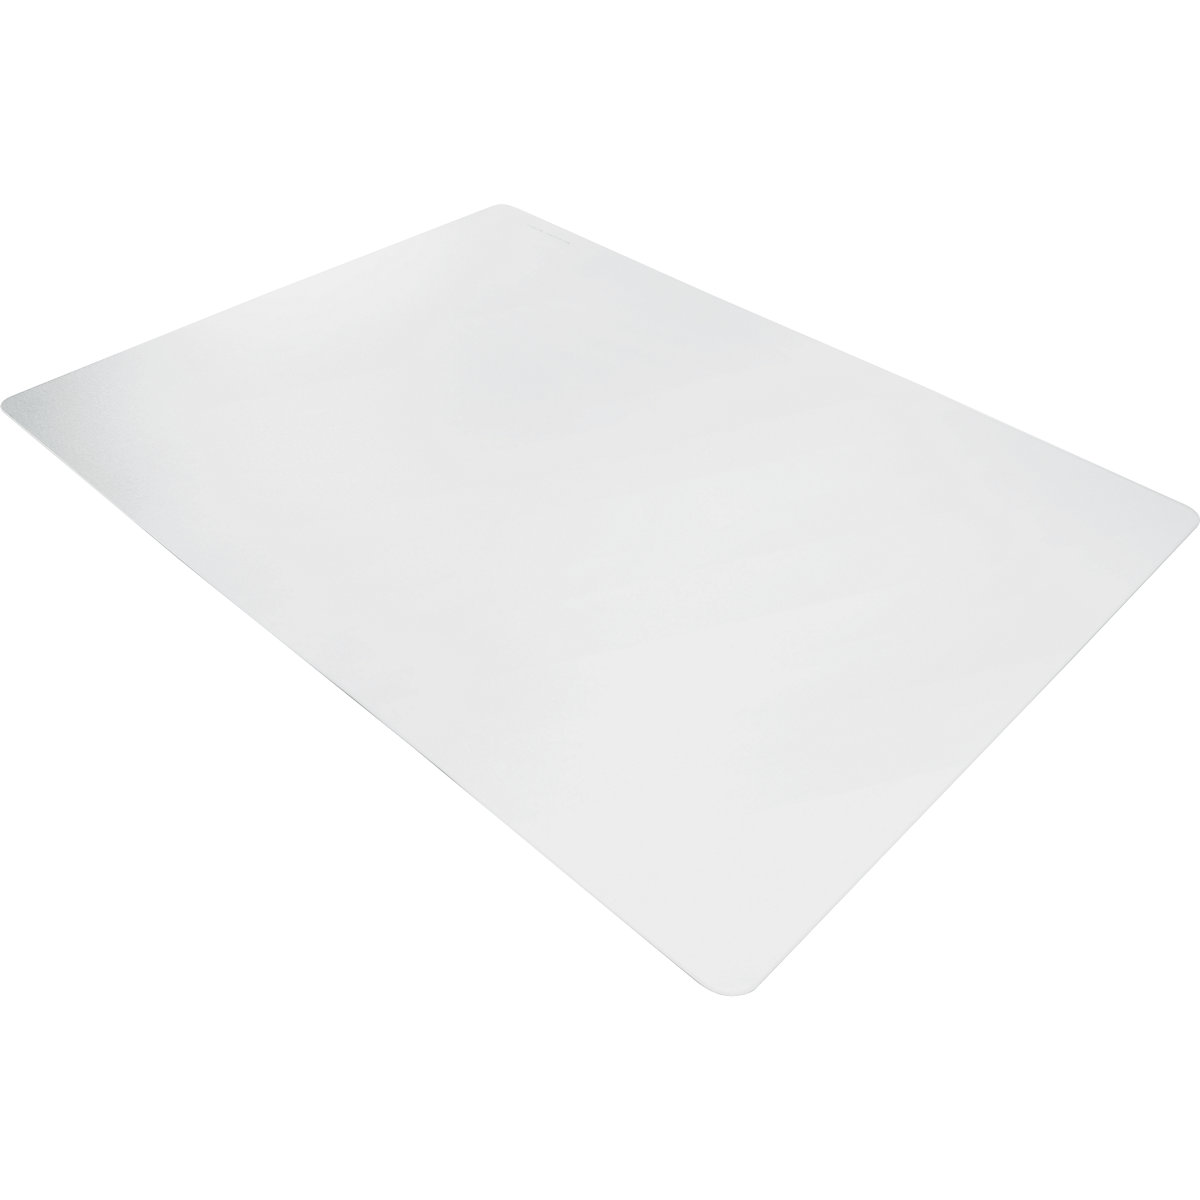 Floor protection mat ECOGRIP SOLID, for smooth and hard floors, WxD 1500 x 1200 mm-4